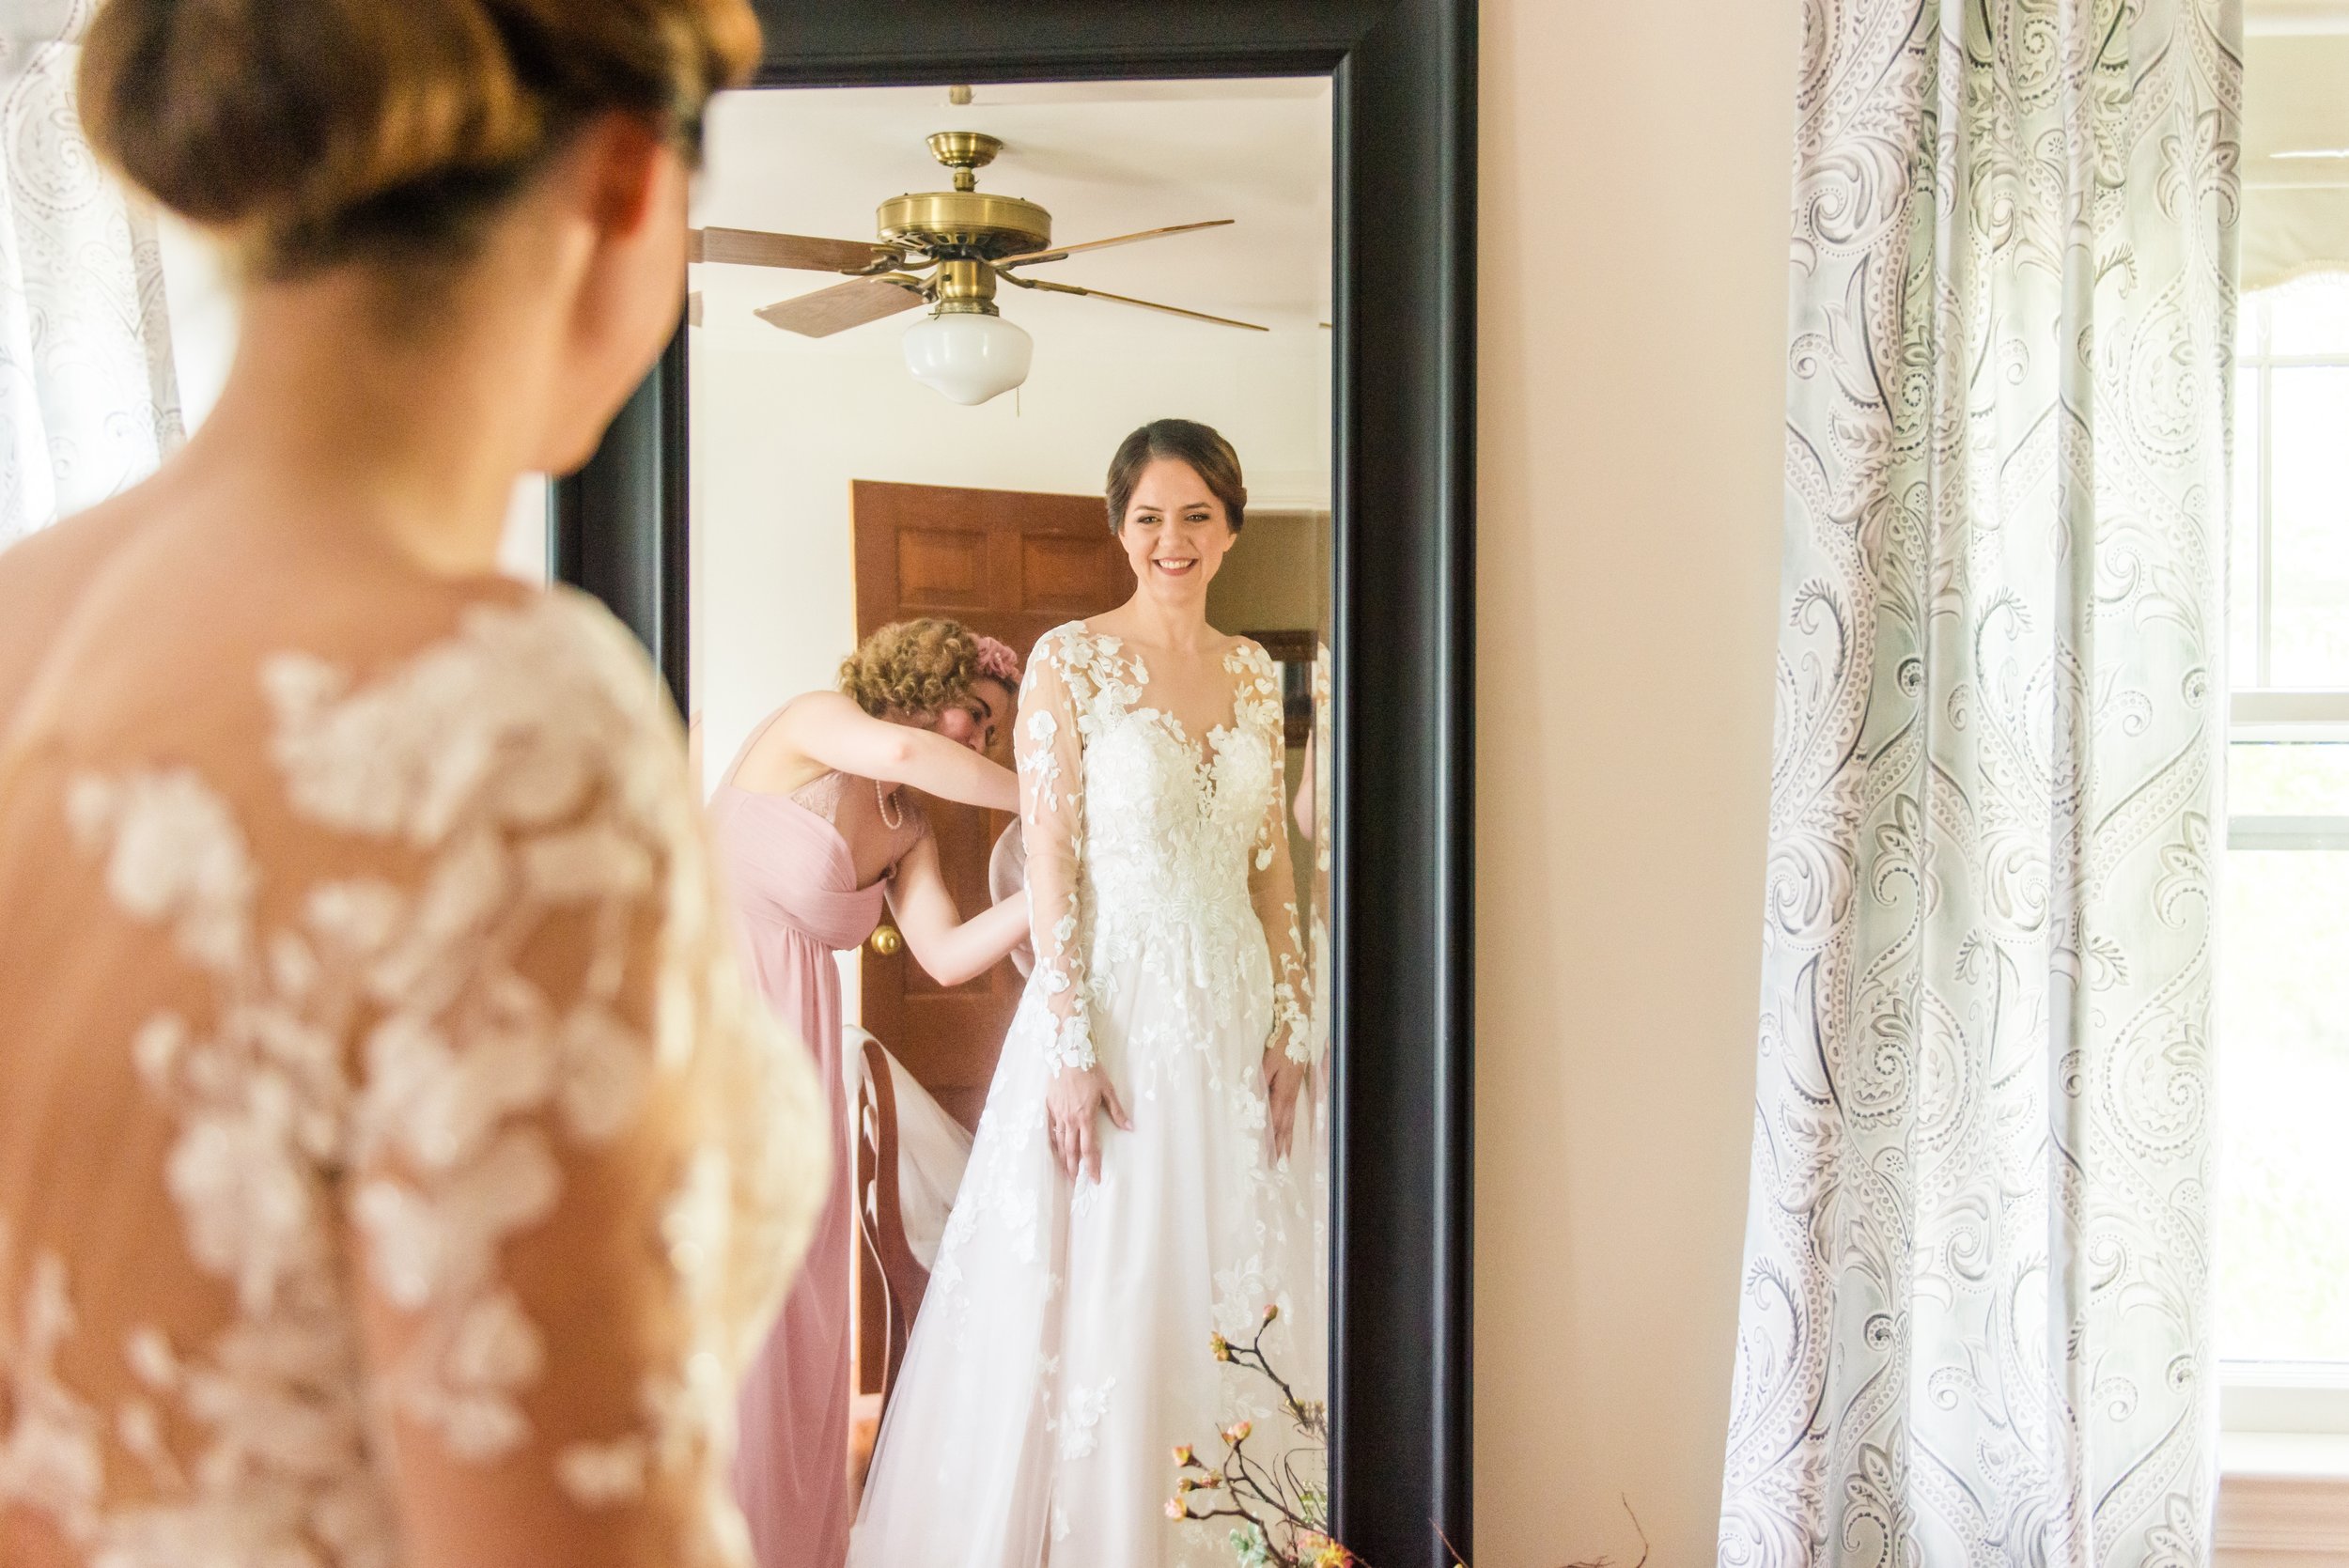 A bride looking in the mirror of the getting ready suite before her wedding at The Barns at Hamilton Station Vineyard in Leesburg, Virginia